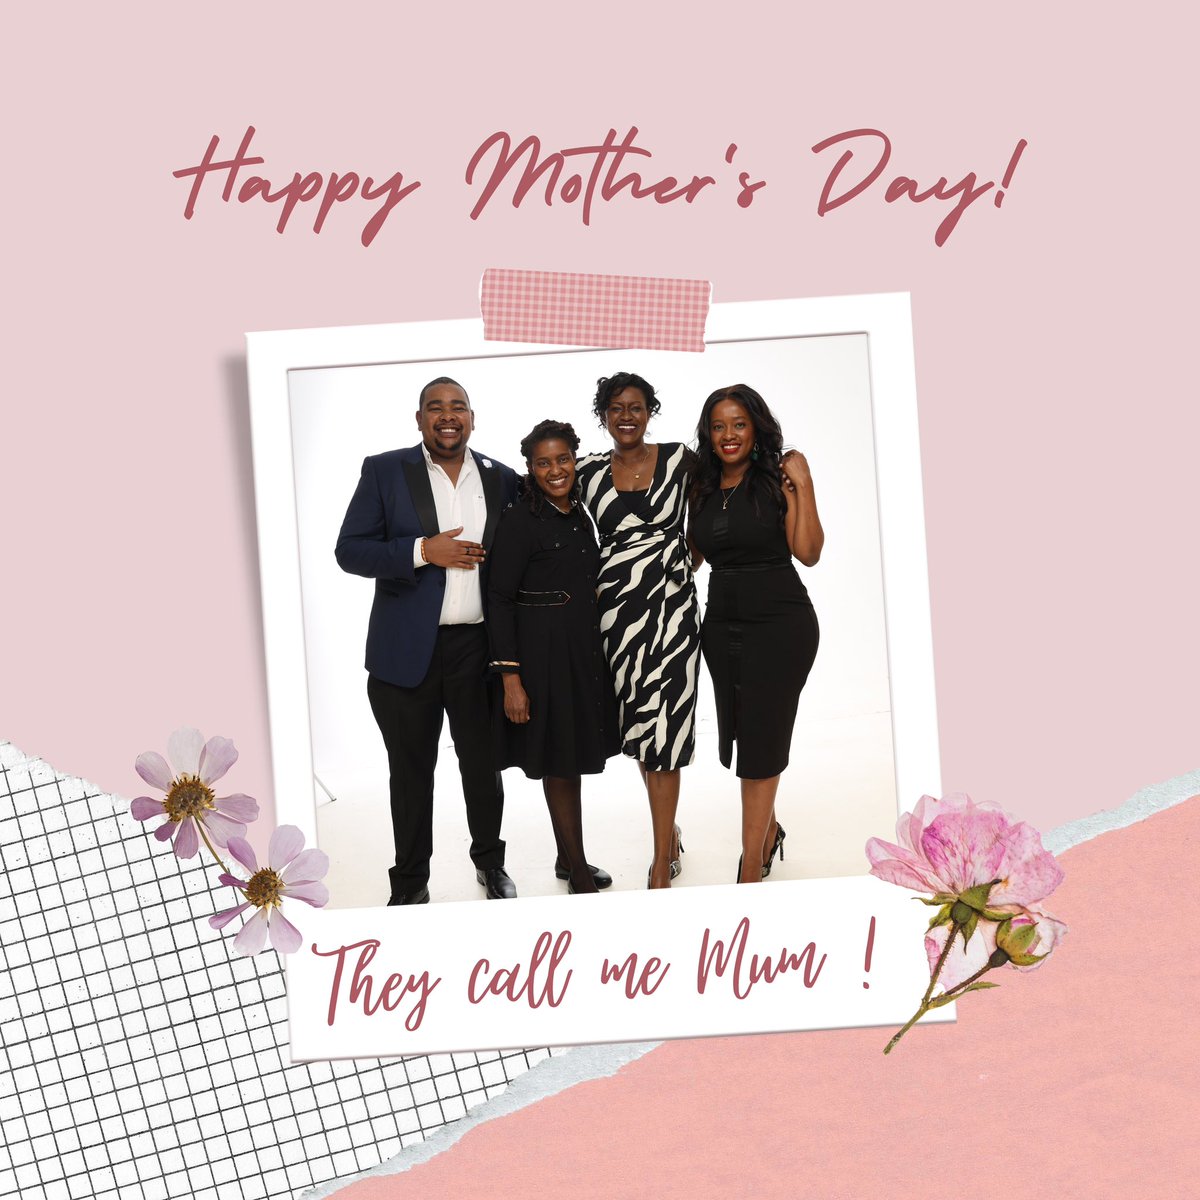 Happy Mother’s Day to all the mothers out there. We celebrate you today. We are here because of you! We thank you and honour you for all that you do. Being a mother is learning about strengths you didn't know you had, and dealing with fears you didn't know existed. May we